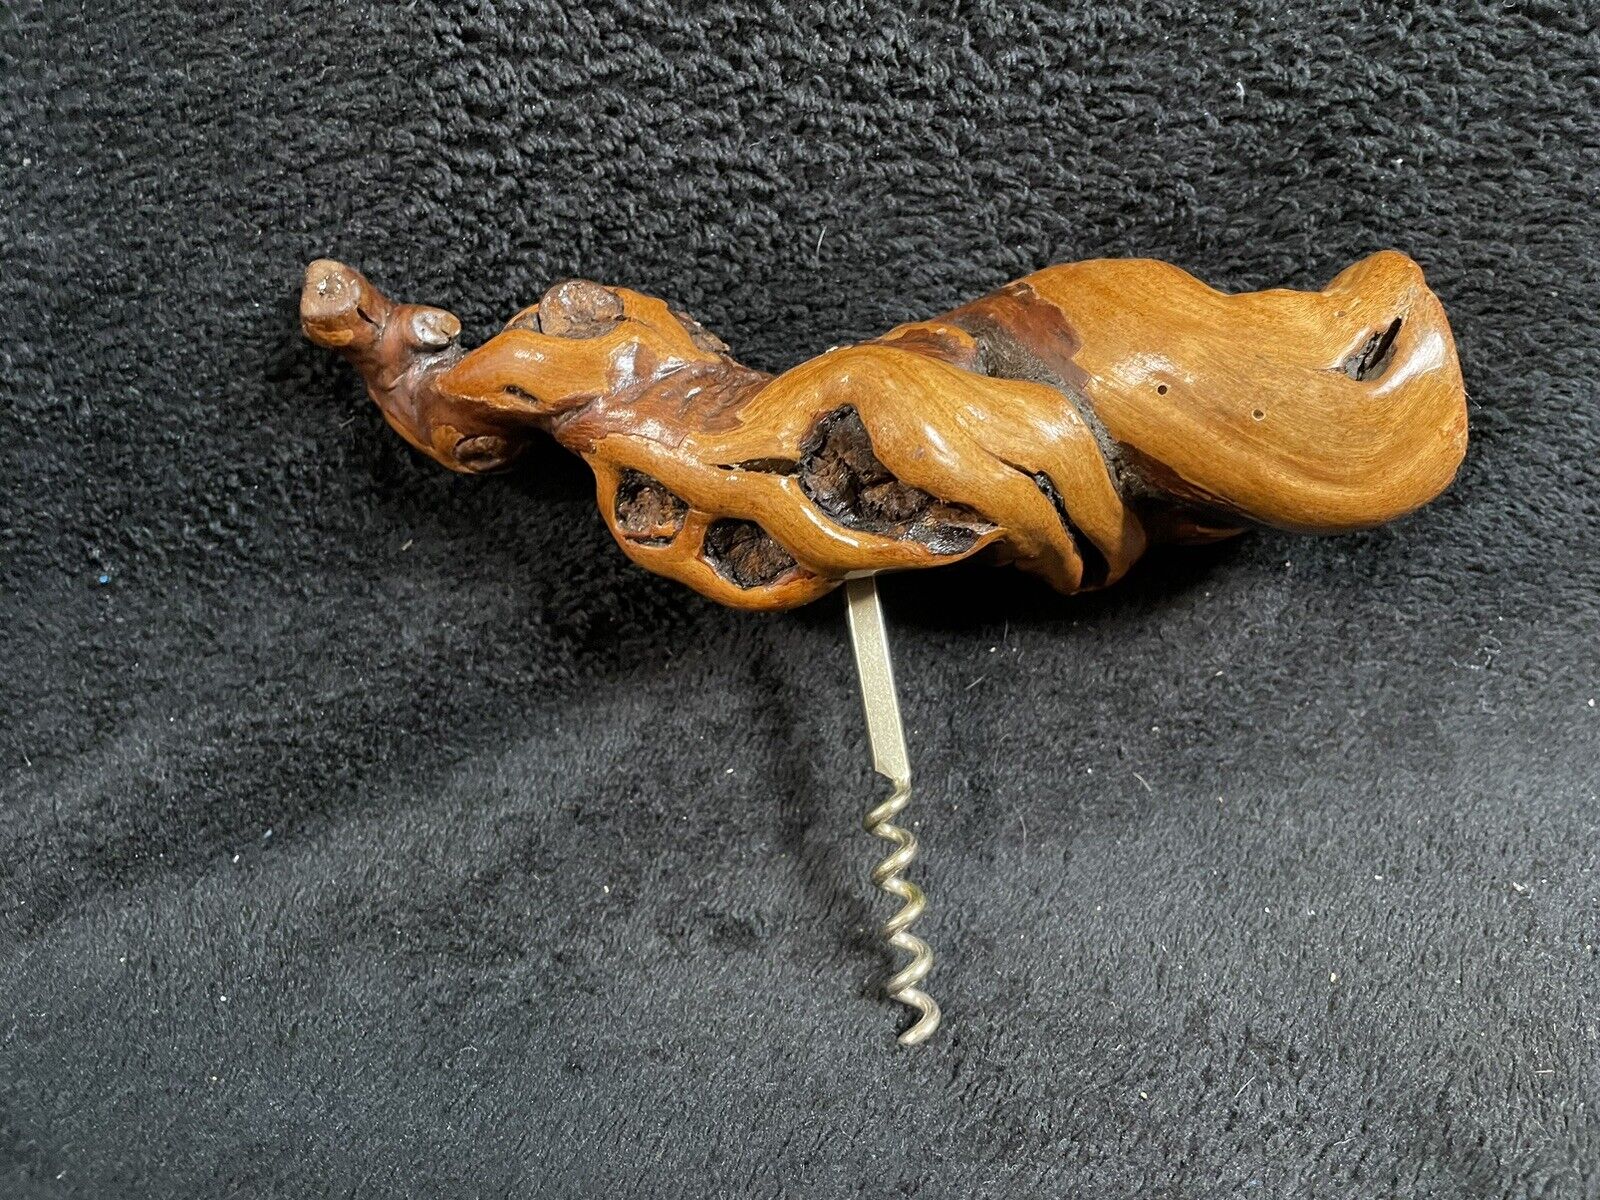 Unique Vintage 8 in. Wood Handled Corkscrew. One of a kind Handmade